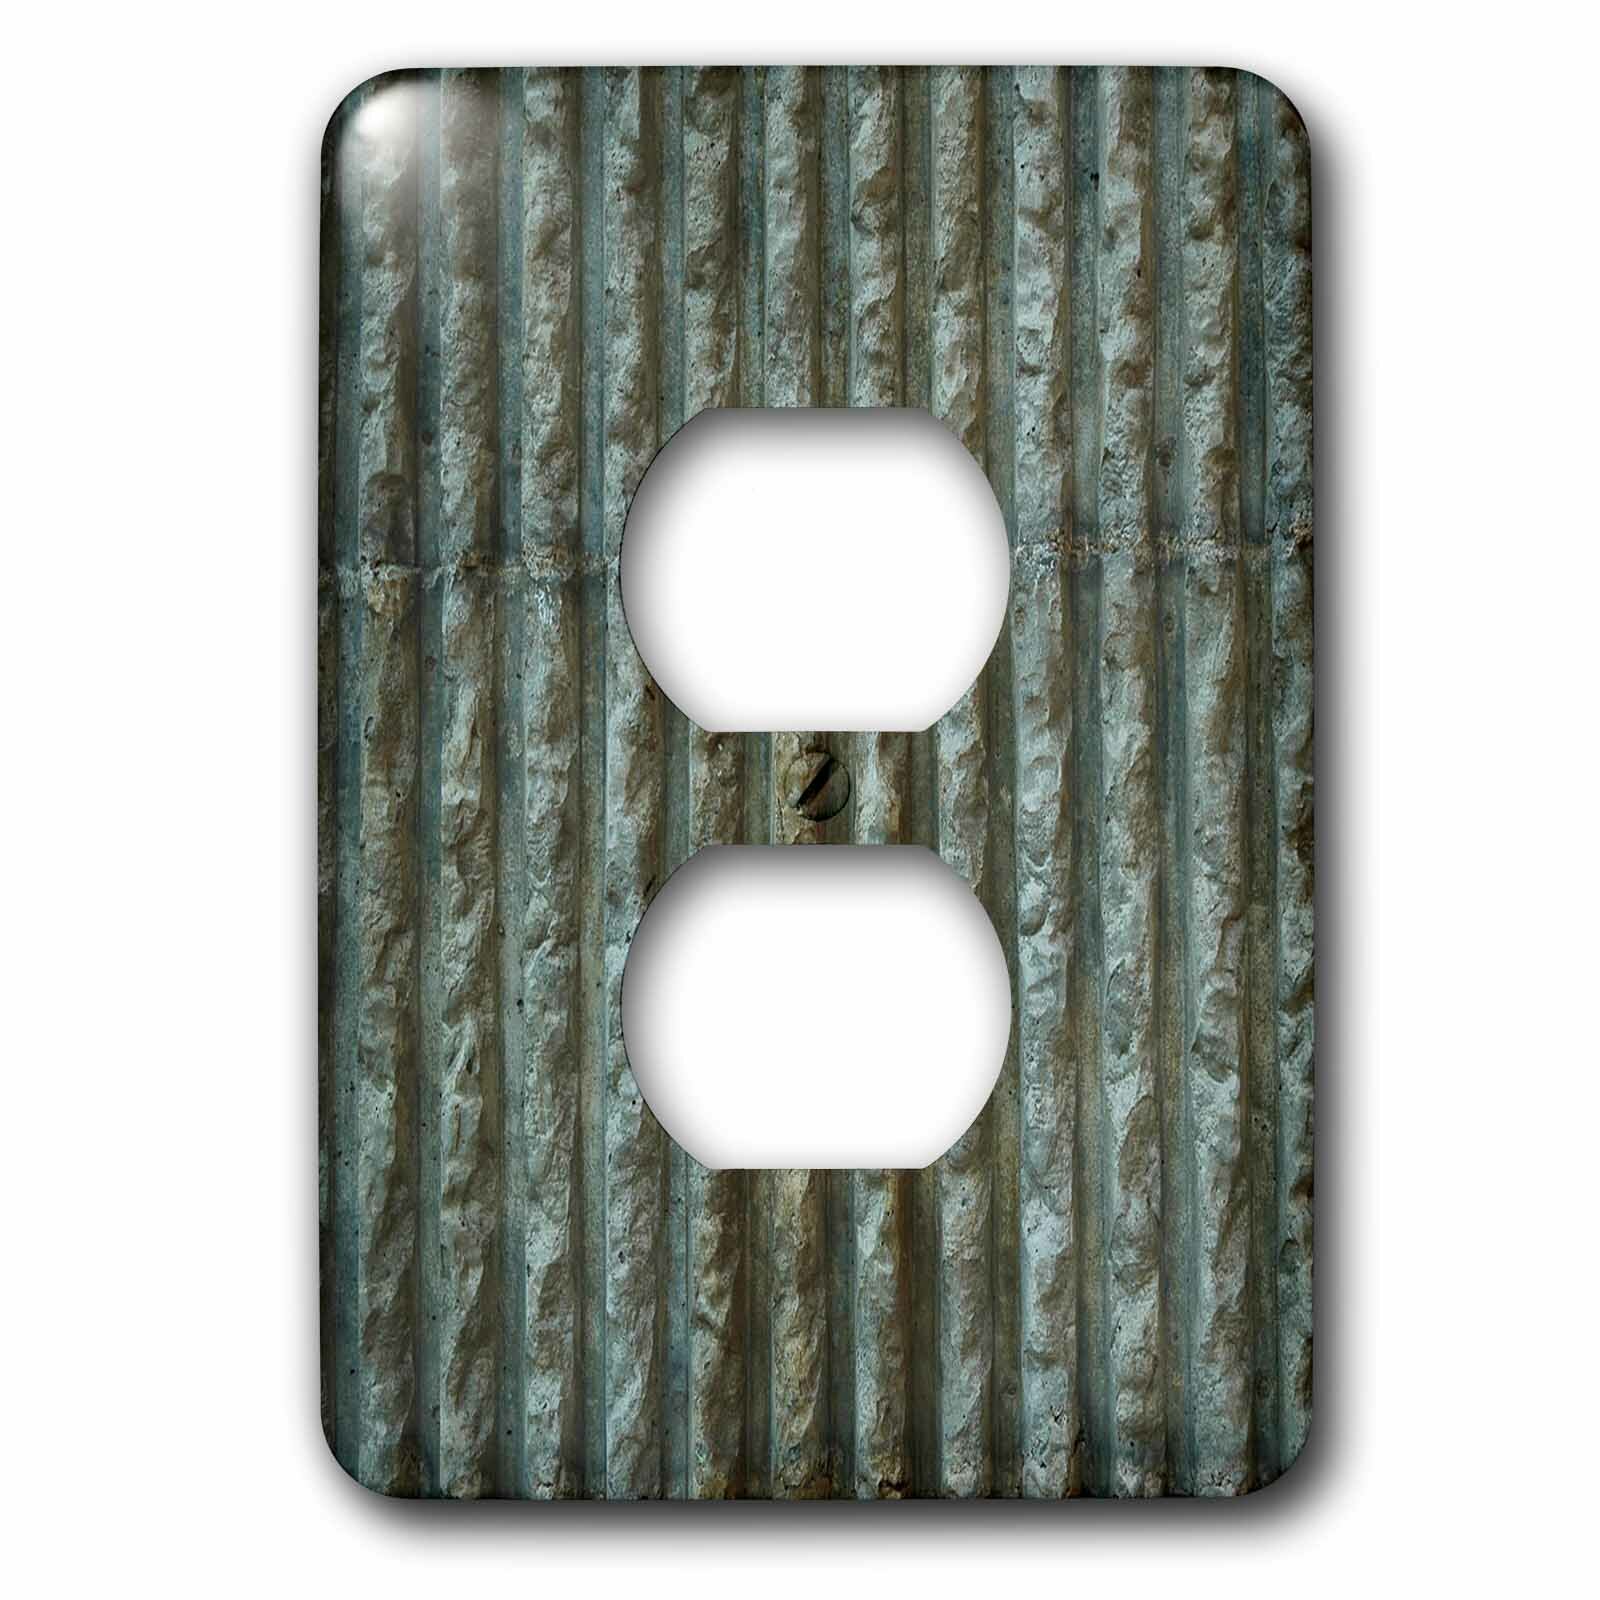 Wall Plates Faux Wood Grain 5 Pattern Texture Light Switch Covers Home Decor Outlet Home Garden